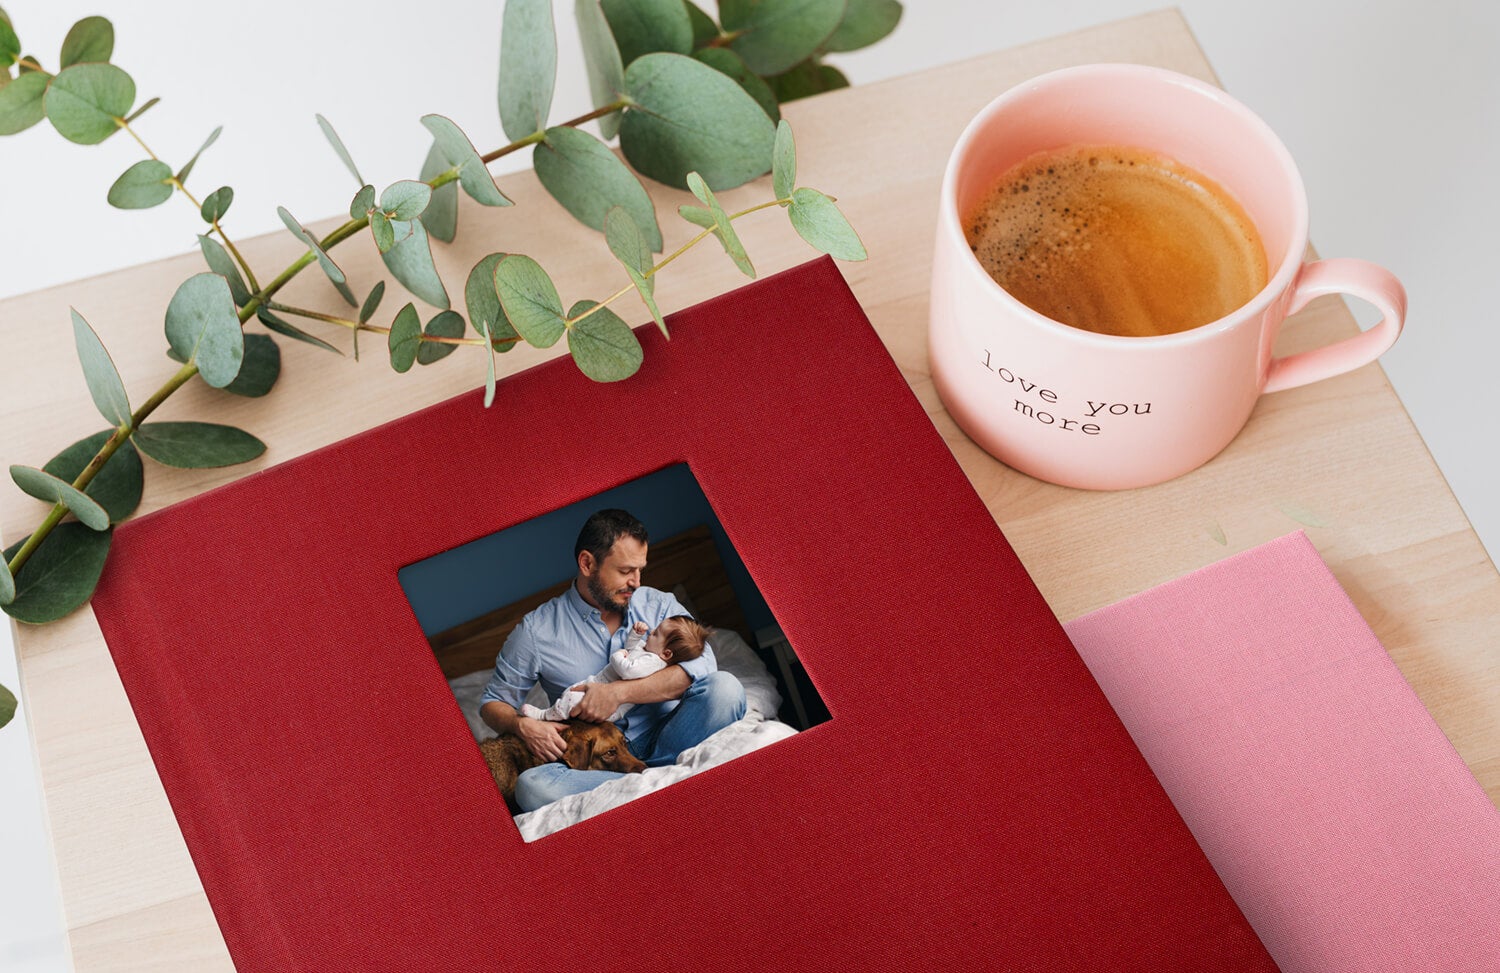 A Love-Colored Photo Book for Your Significant Other